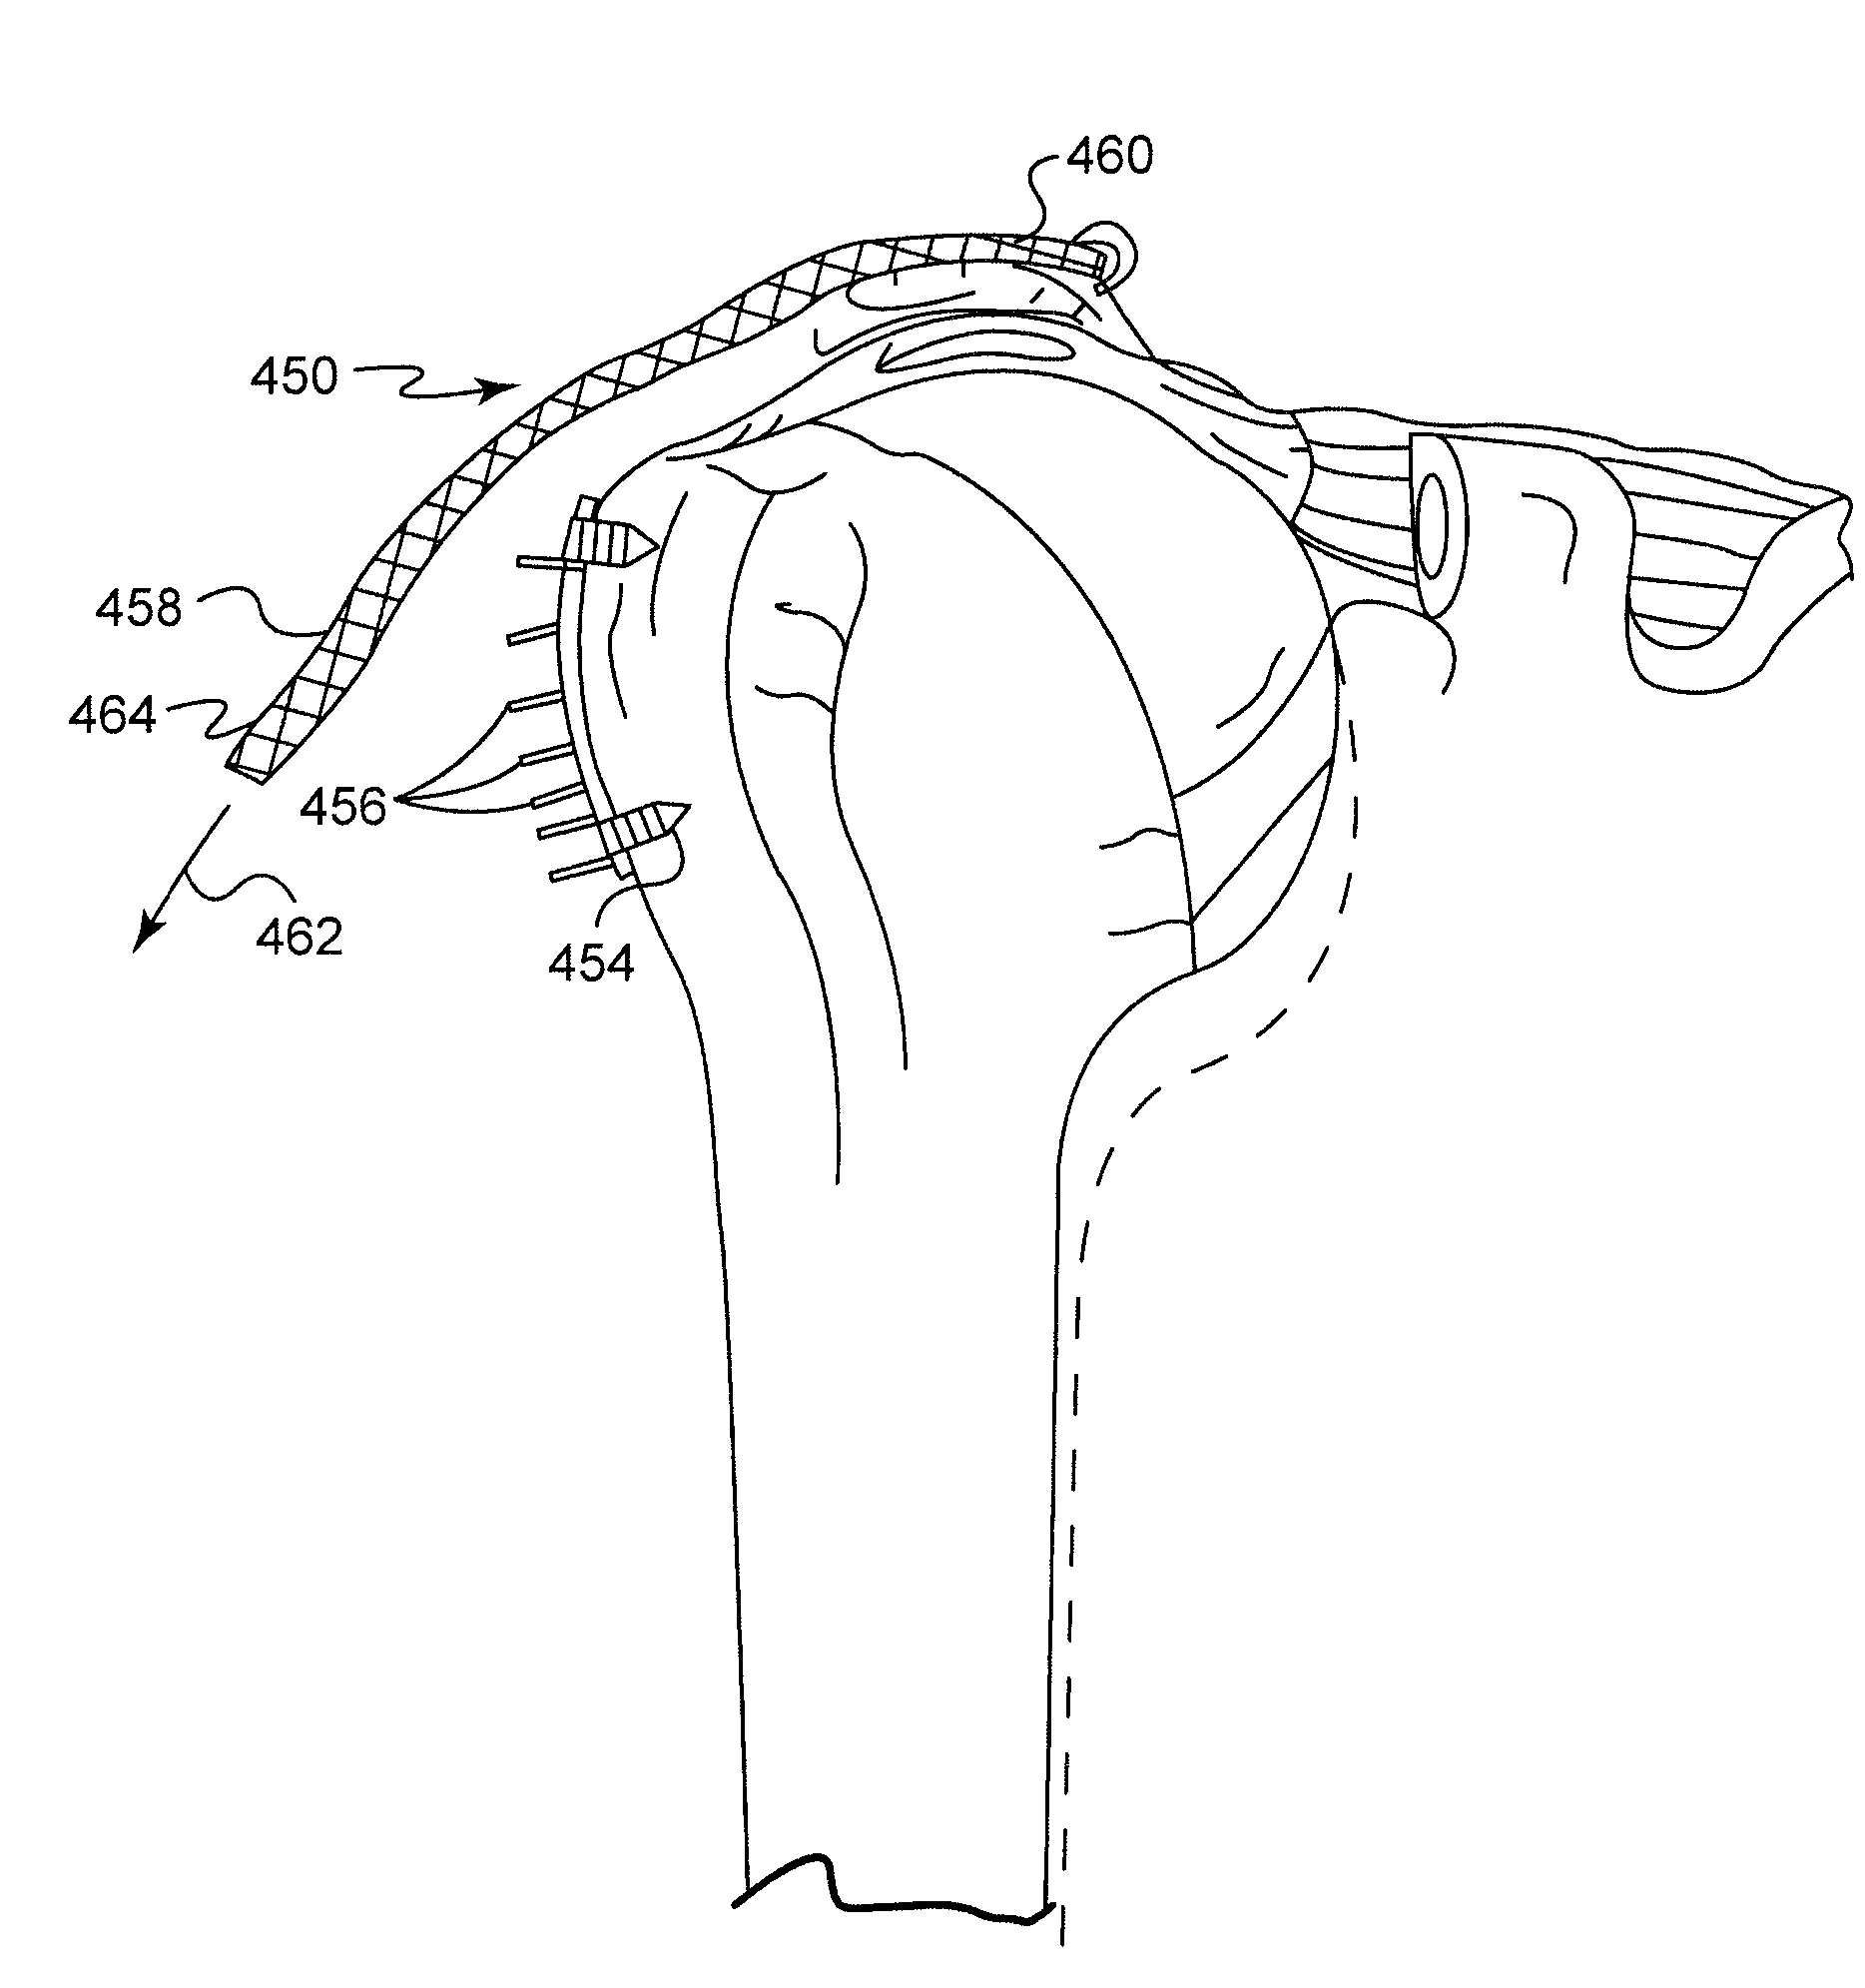 System and method for repairing tendons and ligaments